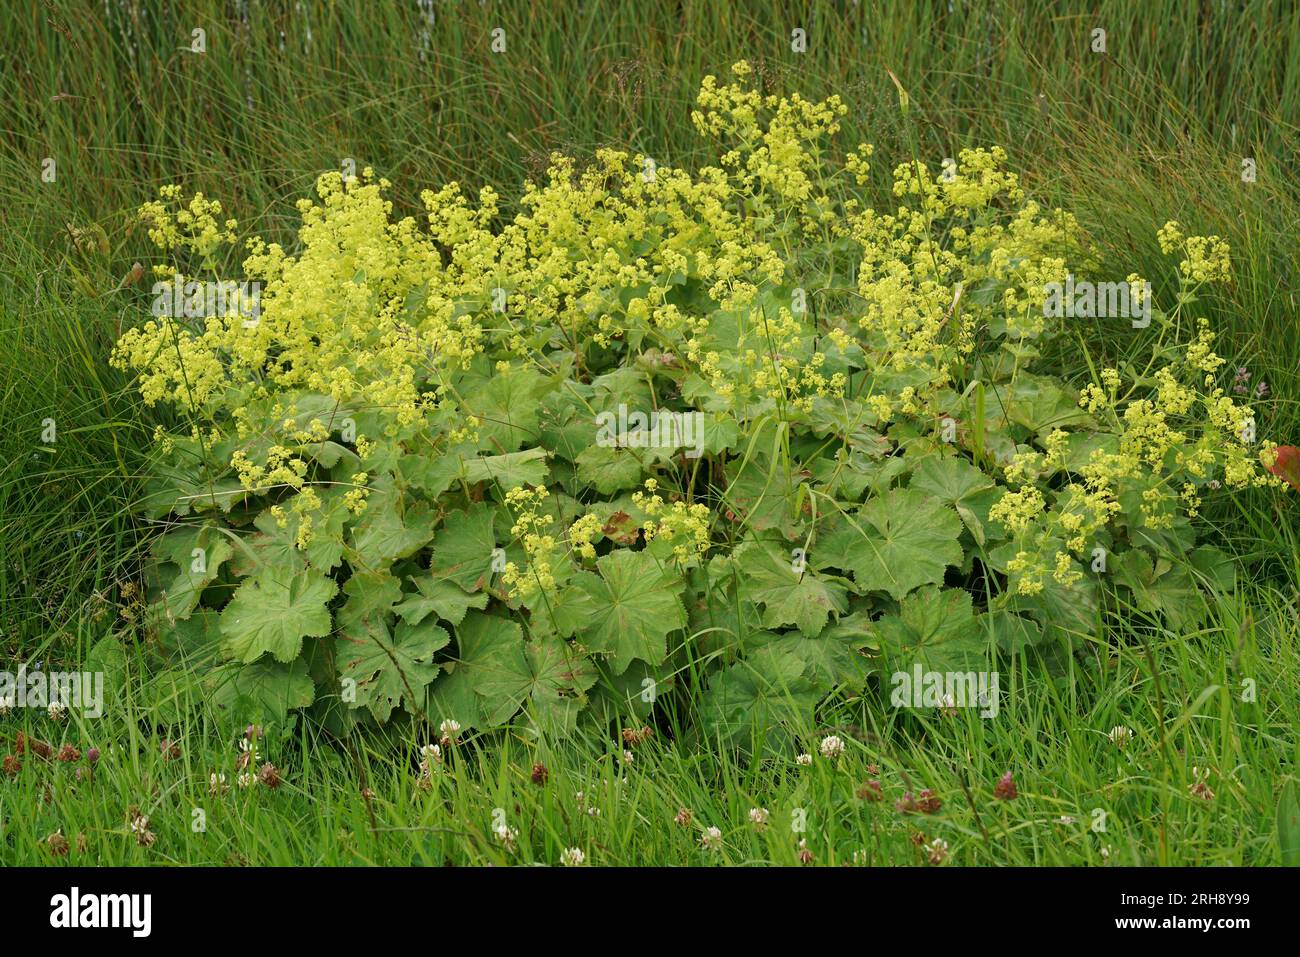 Natural closeup on an isolated scented homeopathic garden lady's-mantle plant -, Alchemilla mollis, in a meadow Stock Photo